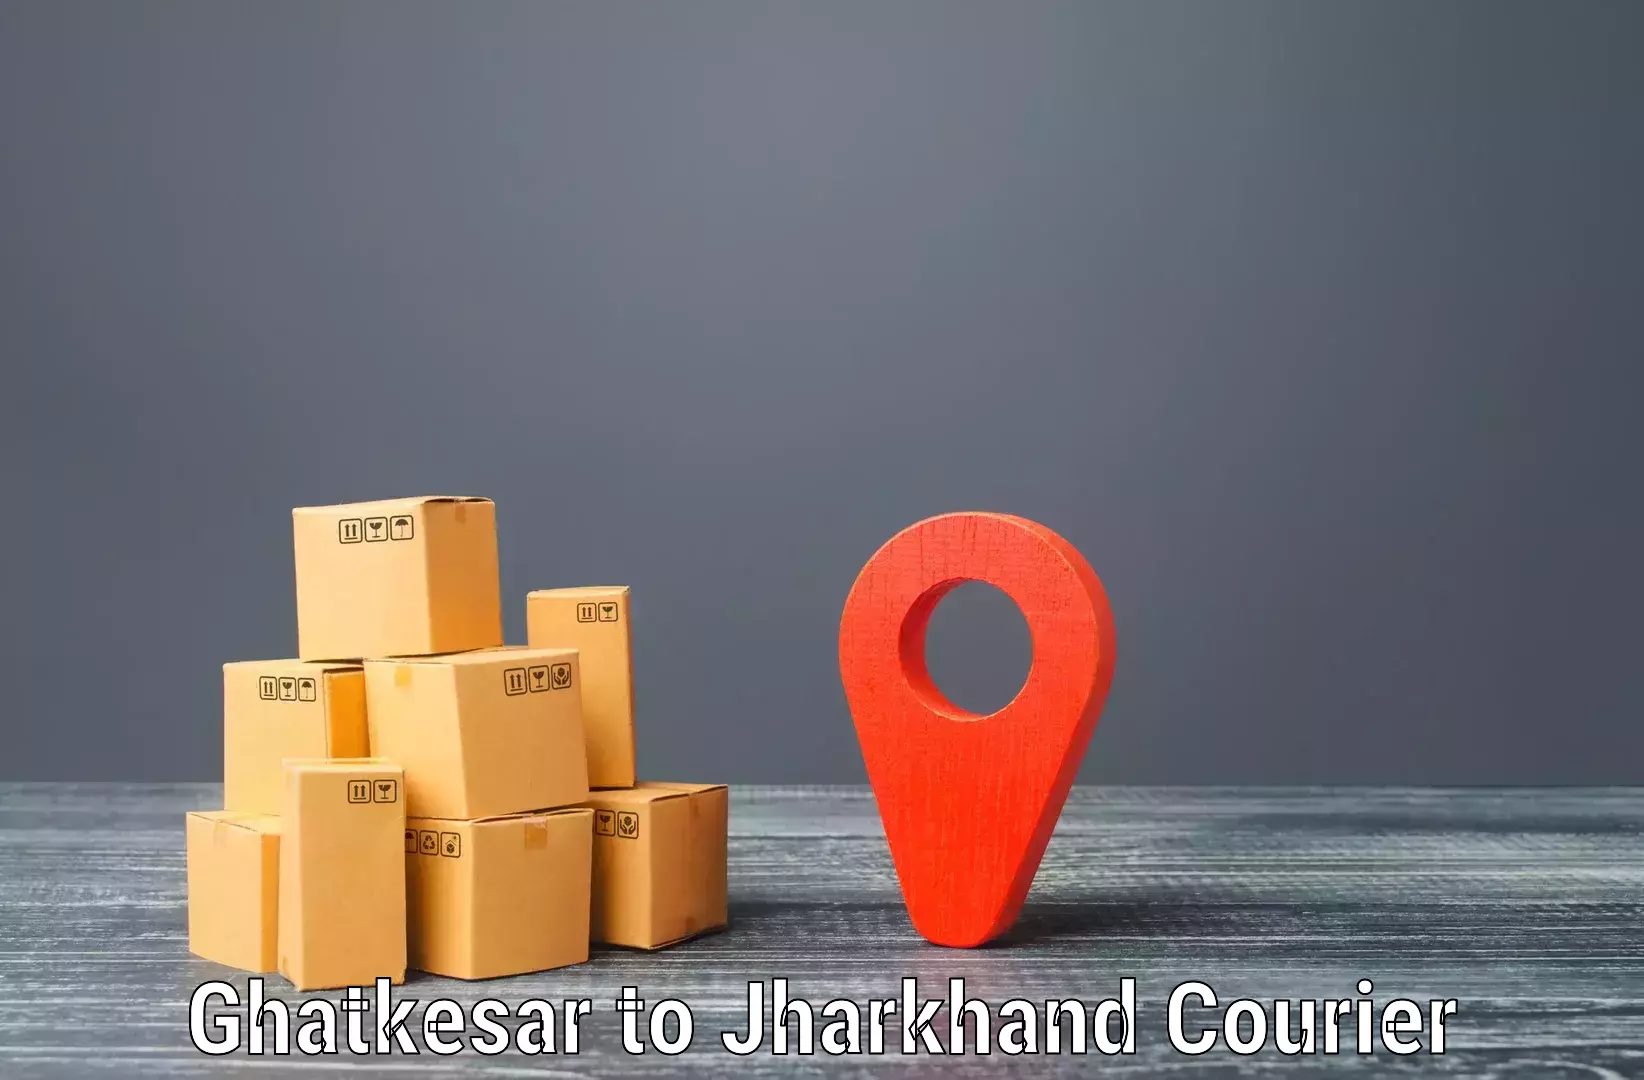 Flexible delivery schedules Ghatkesar to Patan Palamu